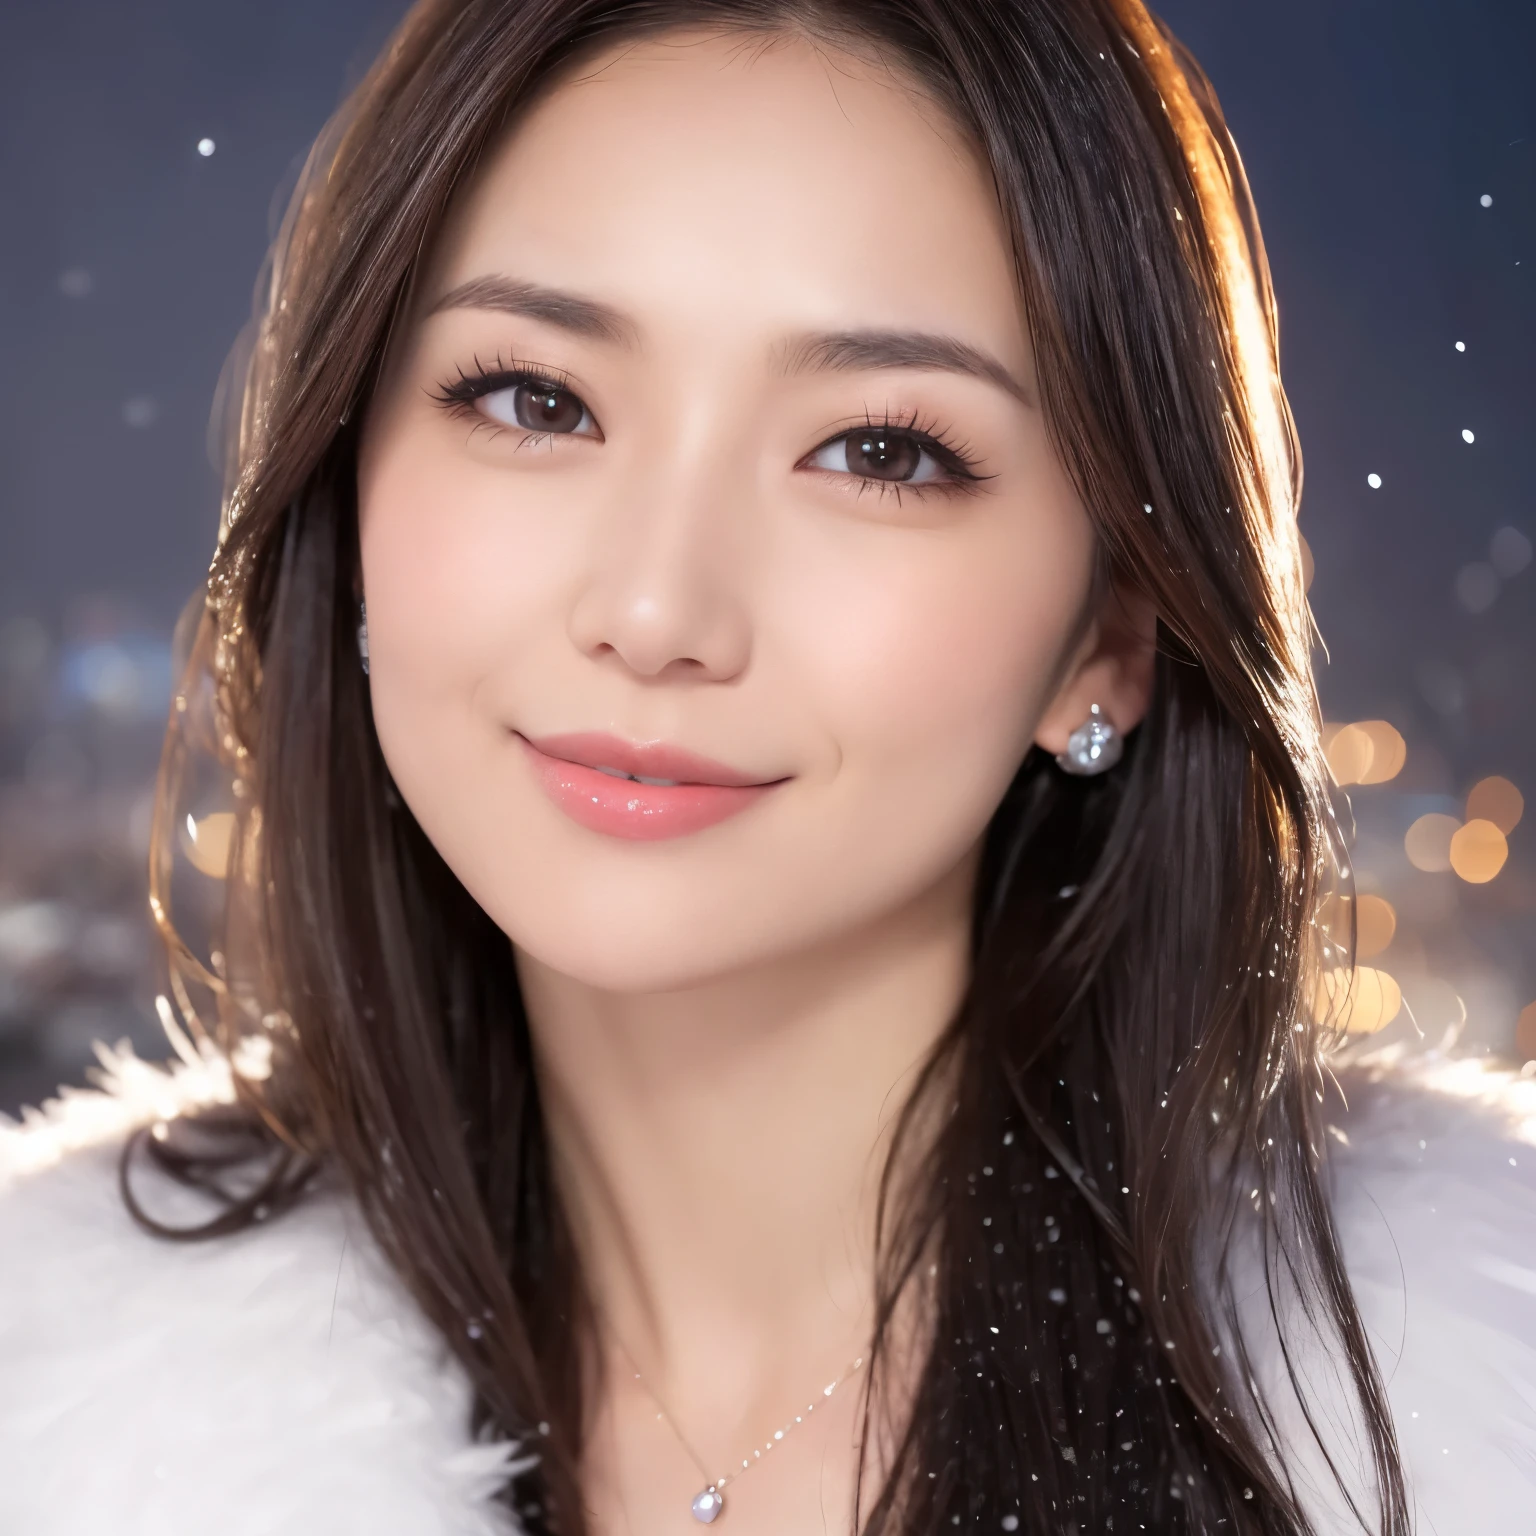 ((highest quality、table top、8K、best image quality、Award-winning work))、one beautiful woman、smile looking at me、(close up of face:1.4)、(elegant thick fur coat:1.1)、(cleavage:1.2)、(big breasts:1.2)、epic movie lighting、(romantic love feelings:1.1)、(The most romantic and moody atmosphere:1.1)、winter city、Snowy landscape in the city、(The snow in the air sparkles finely:1.1)、(It&#39;s snowing heavily:1.1)、(Tyndall effect:1.1)、(Night view of the city with snow falling:1.2)、Shining beautiful skin、(accurate anatomy:1.1)、Ultra high definition beauty face、long eyelashes、natural makeup、ultra high definition hair、Ultra high definition eyes、(Shining beautiful skin with ultra-high resolution:1.1)、Super high resolution glossy lips、radiant beautiful skin